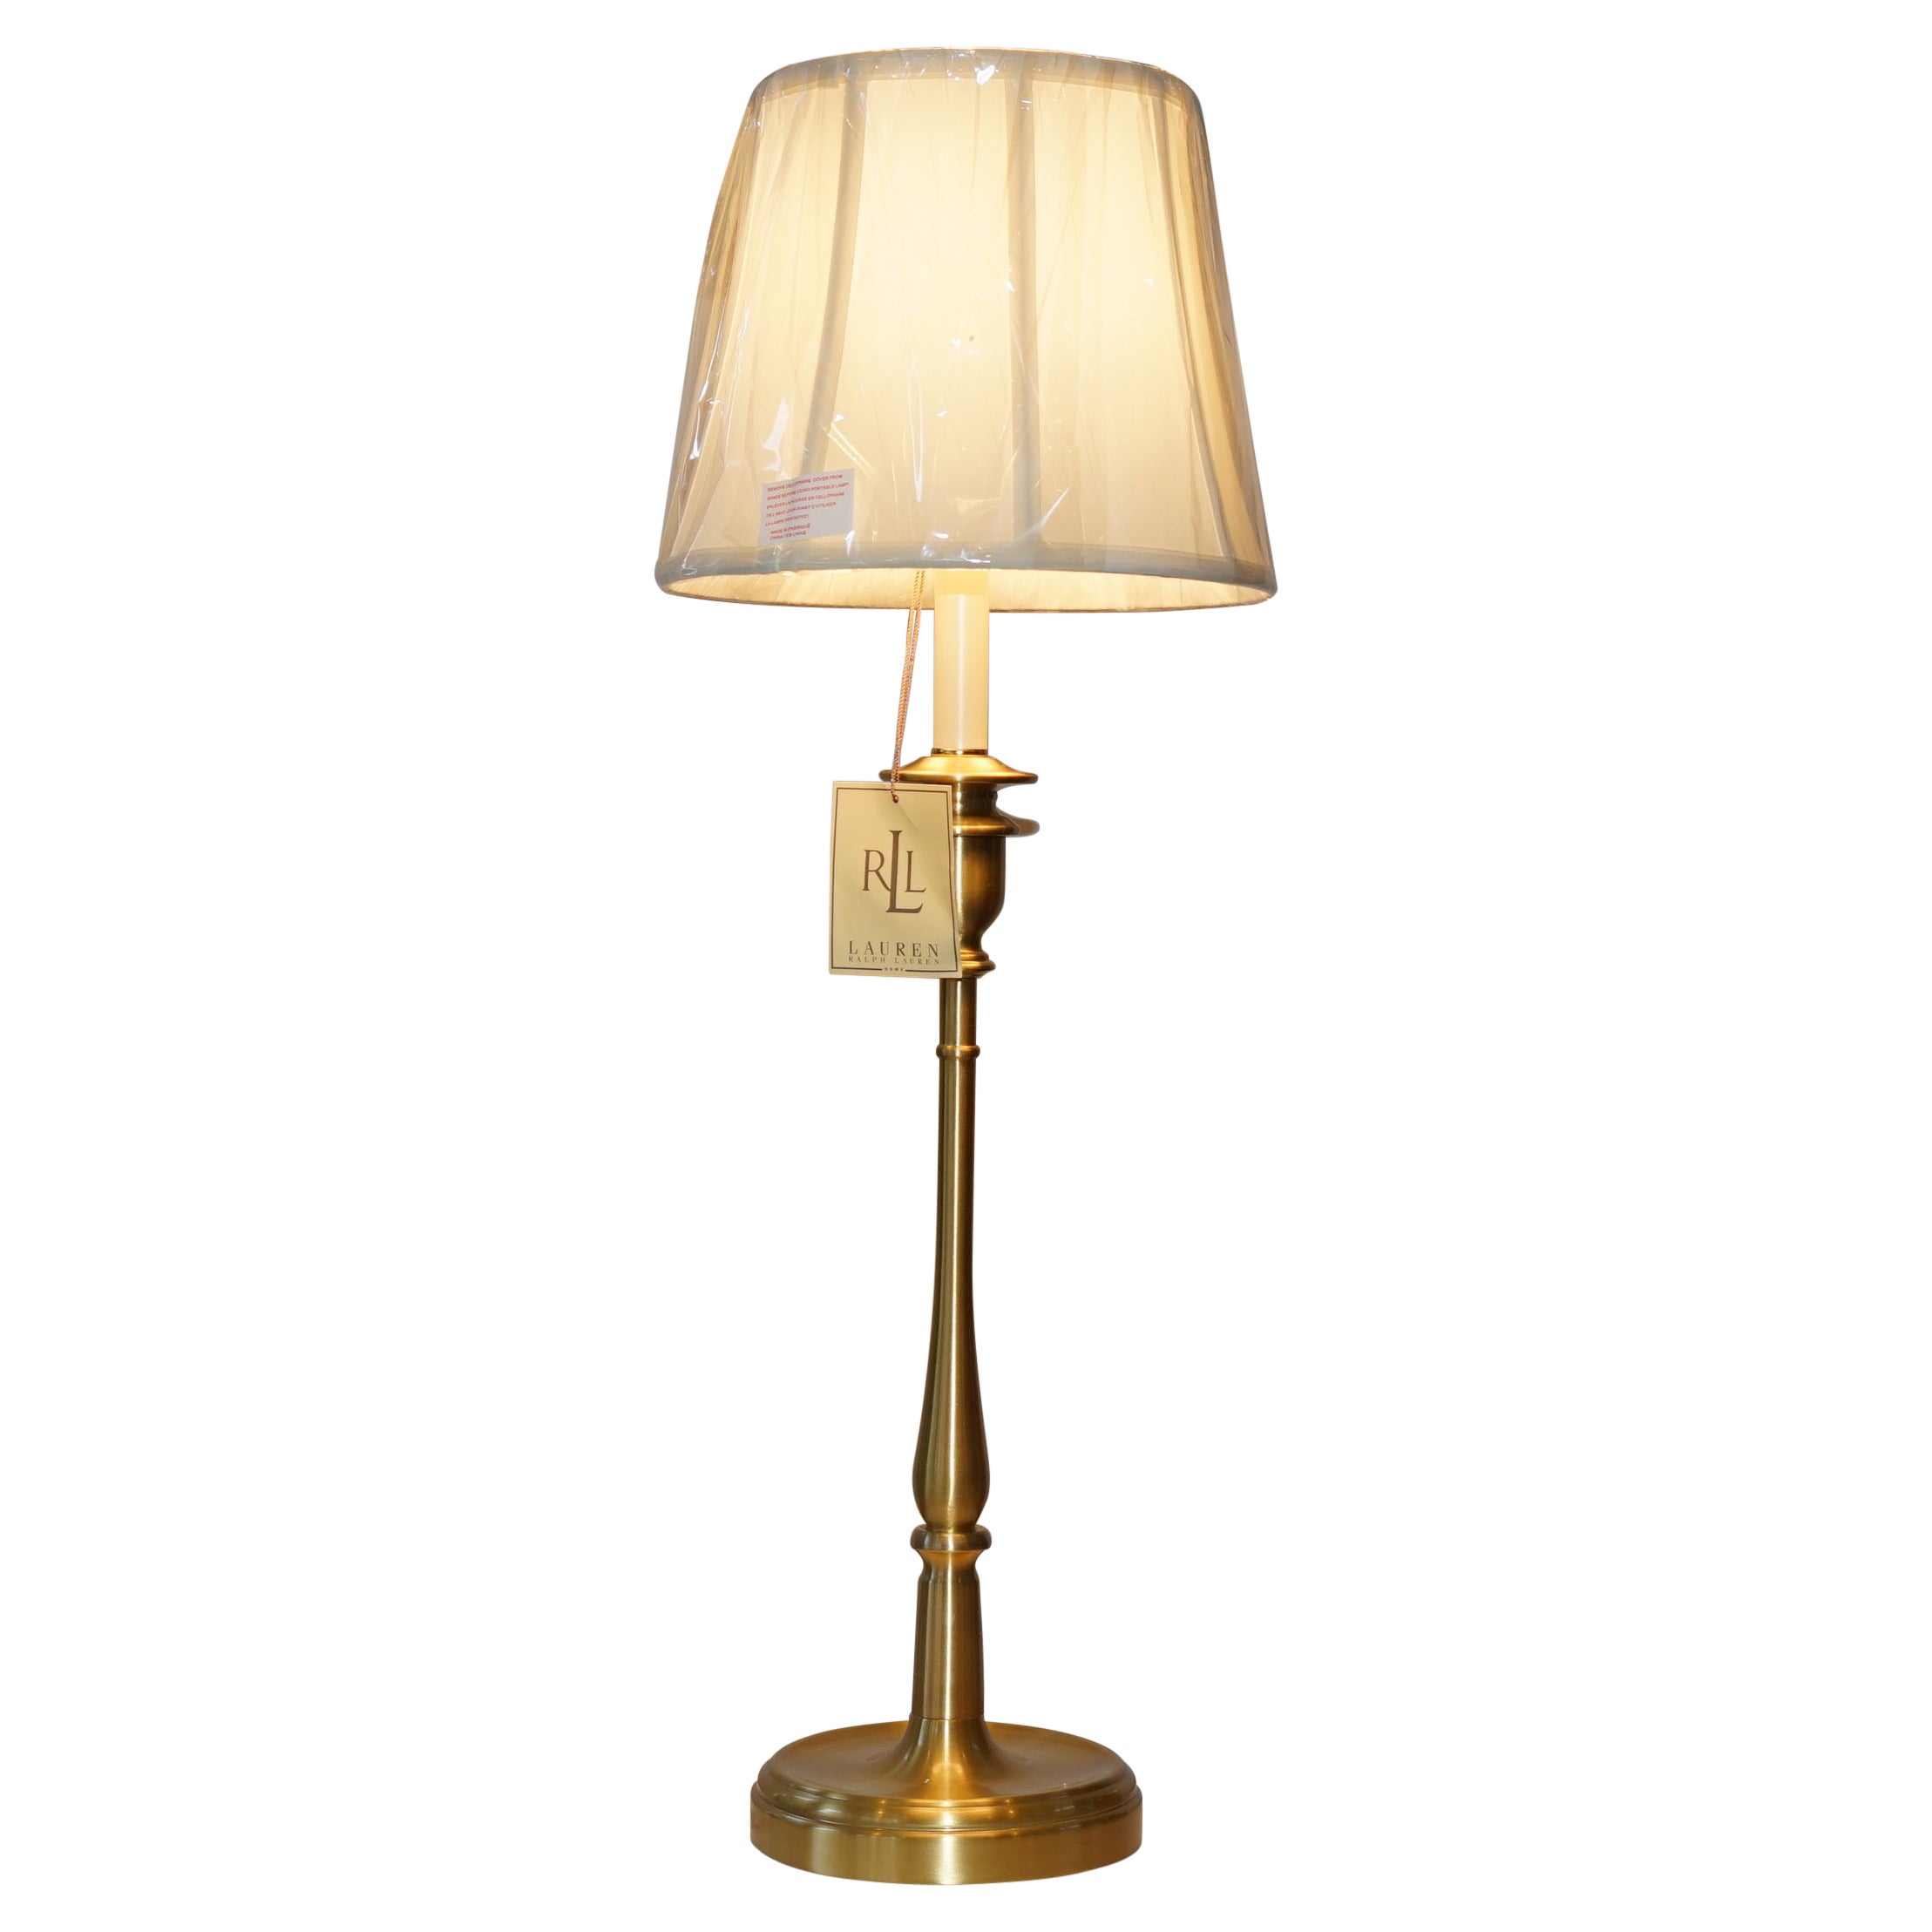 Ralph Lauren Table Lamps - 10 For Sale at 1stDibs | ralph lauren table lamps  at homegoods, ralph lauren ceramic table lamps, ralph lauren desk lamp